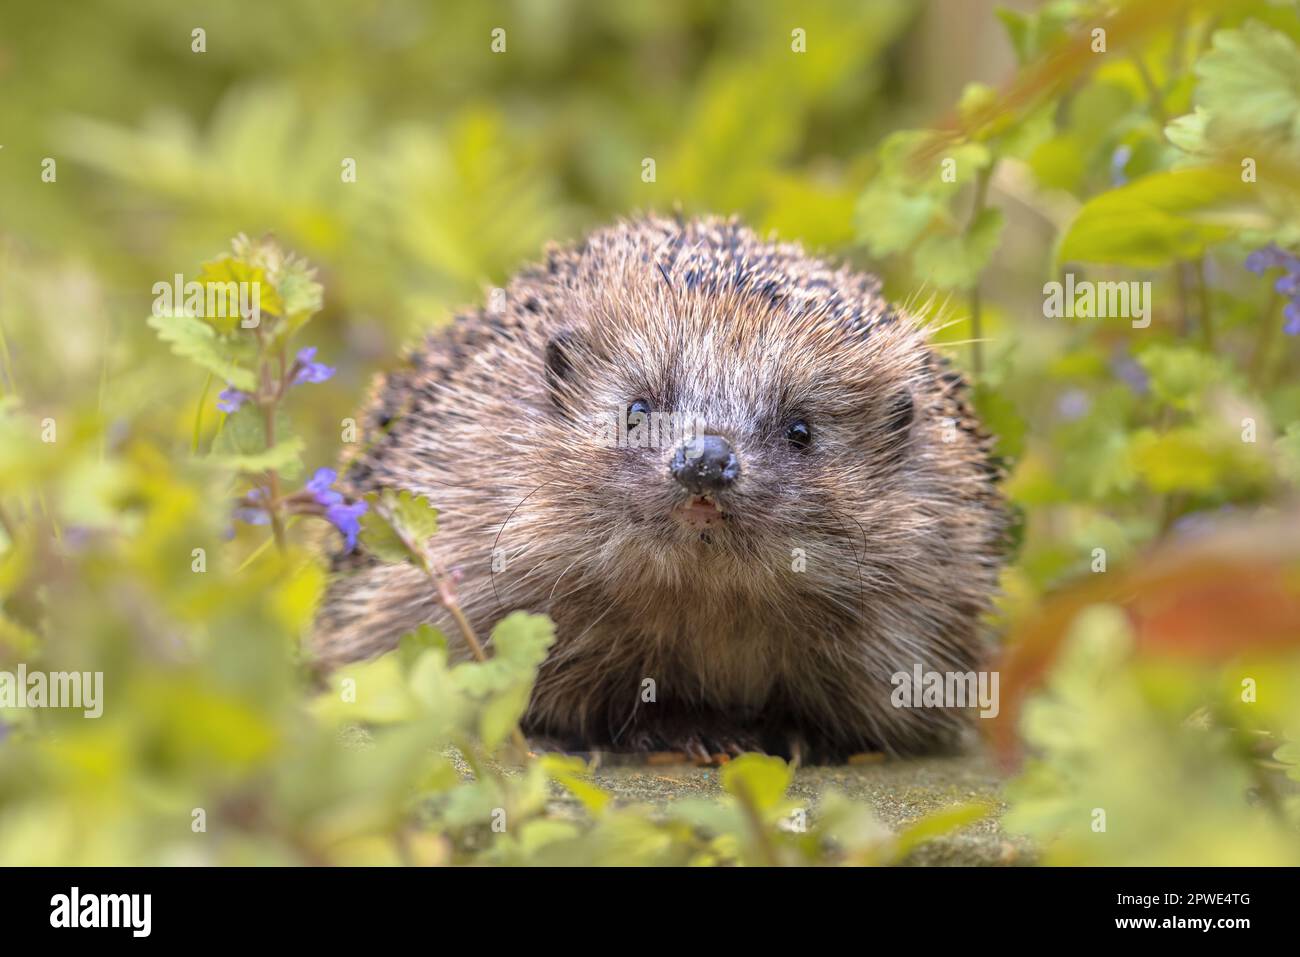 European hedgehog (Erinaceus europaeus) walking in garden with blue flowers. Teh west European hedgehog is native to Europe and can survive across a w Stock Photo